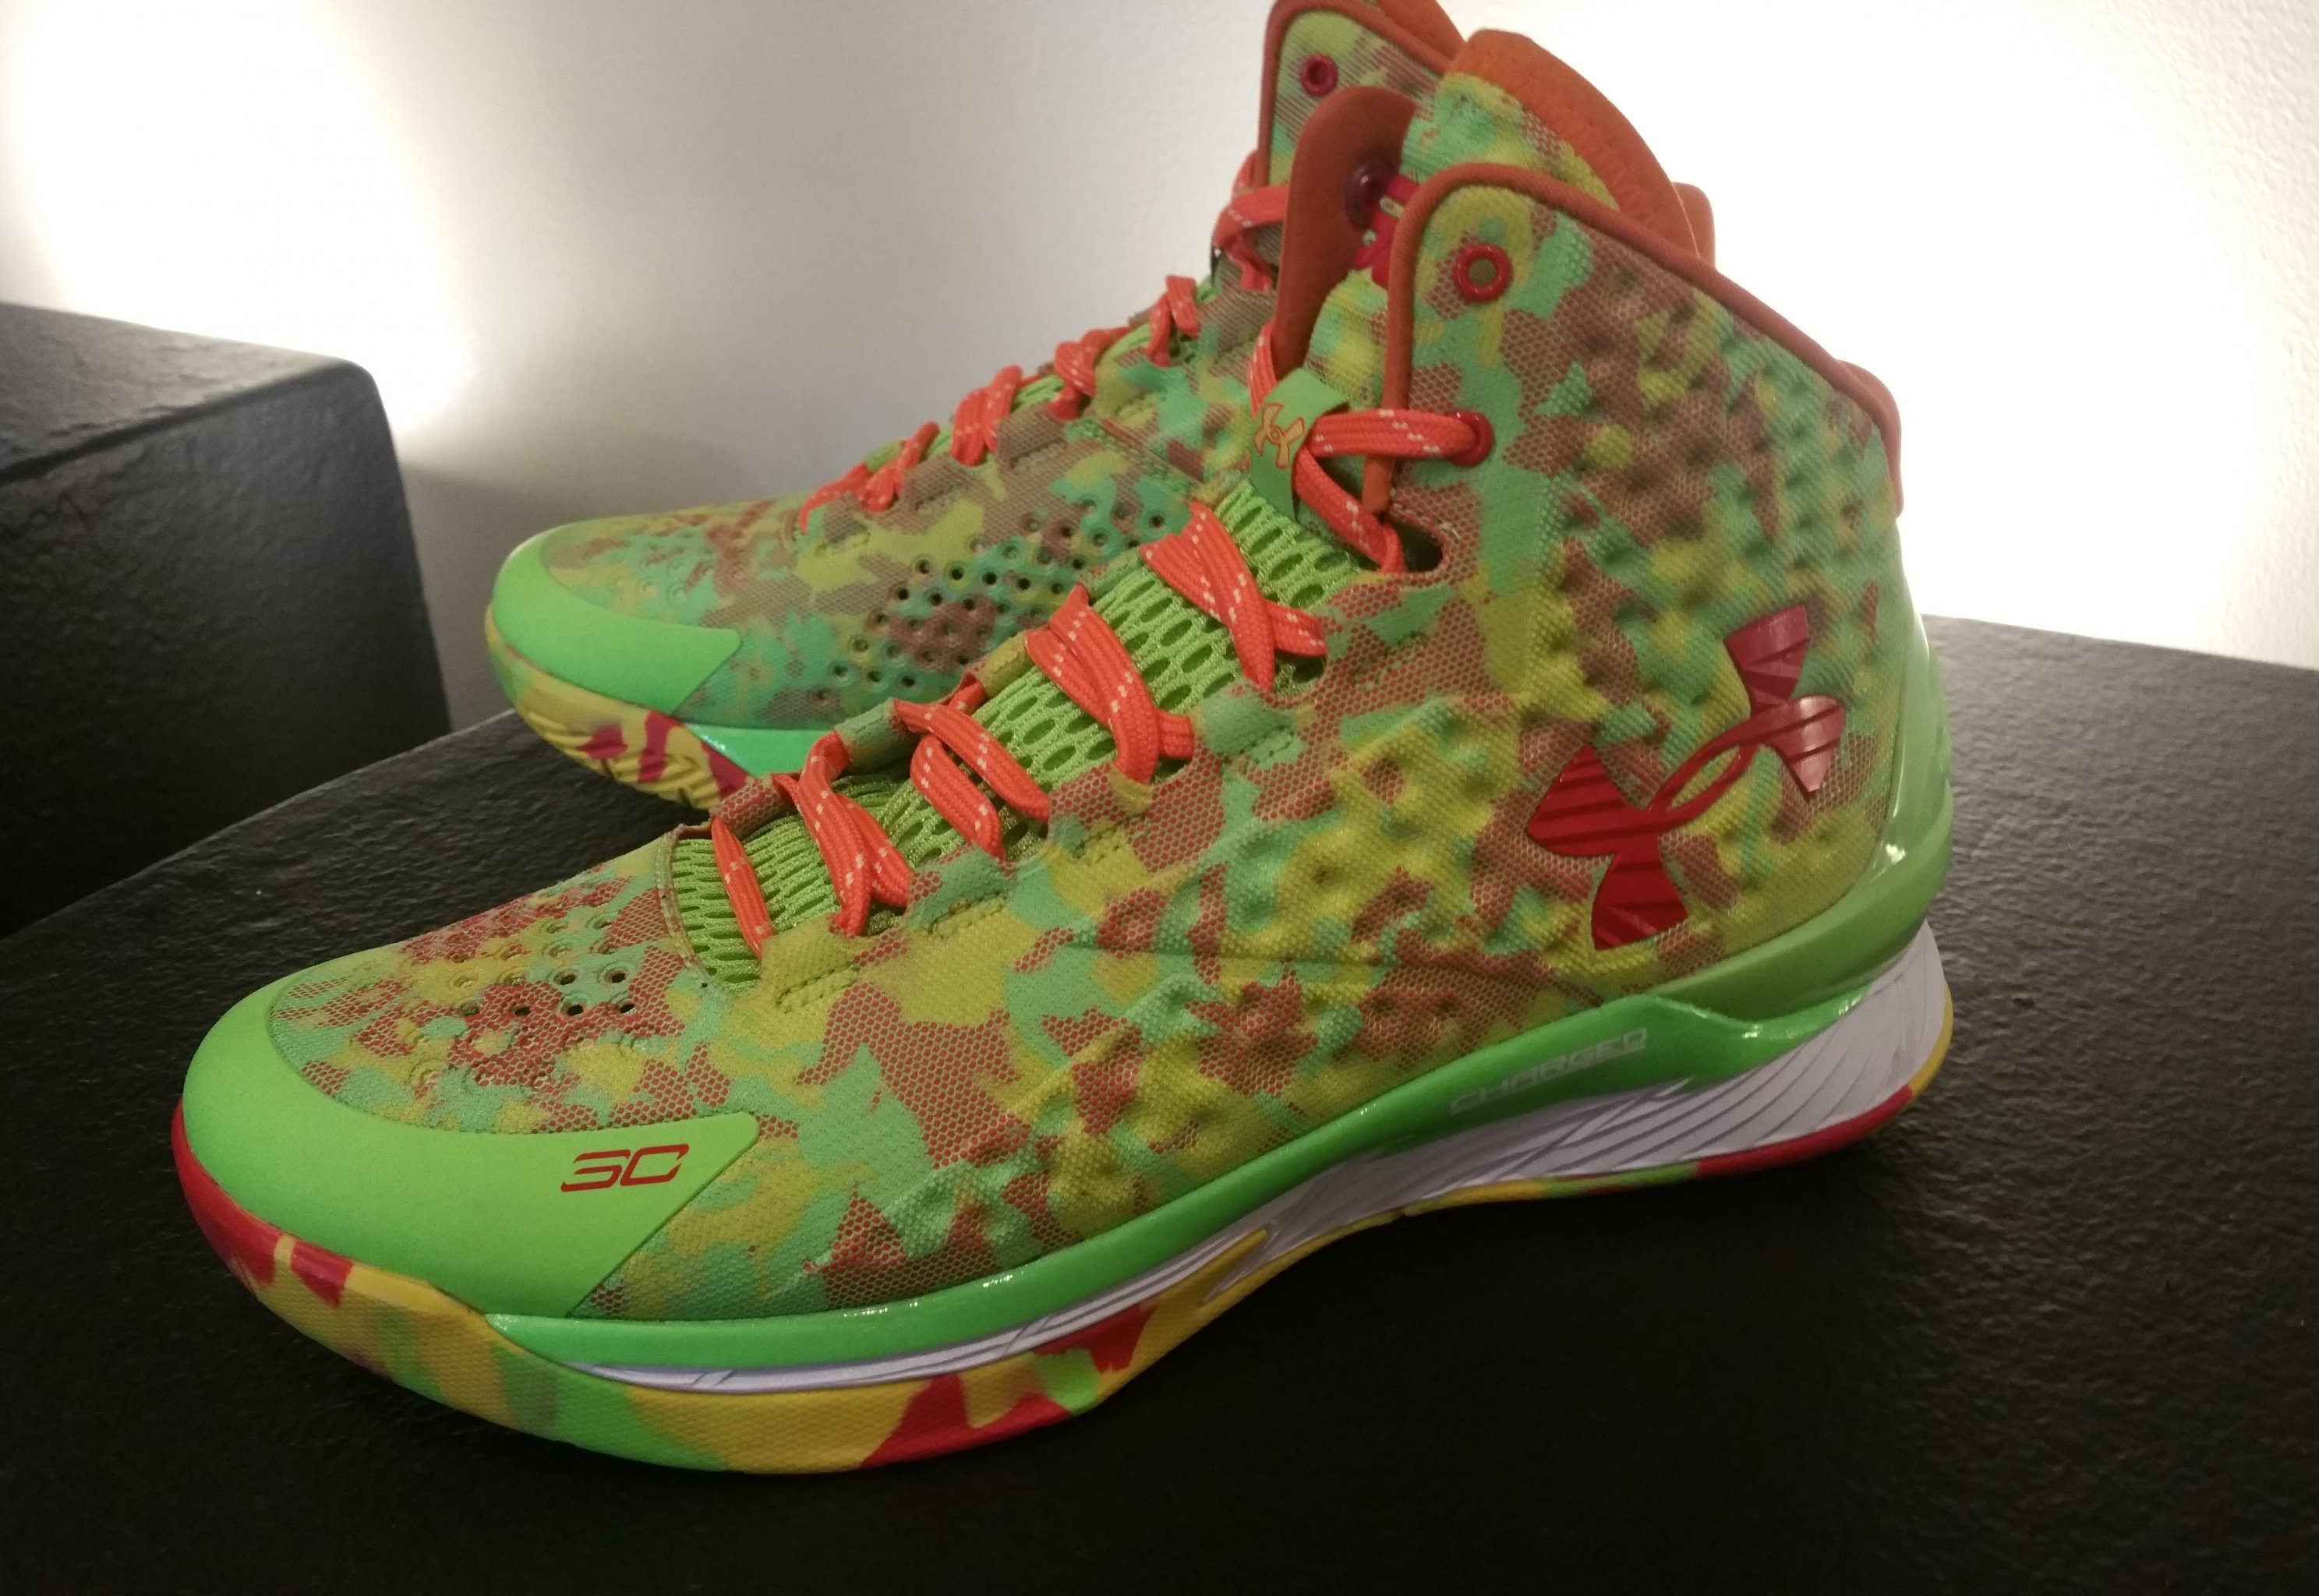 Under Armour Debuts Stephen Curry's First Signature Shoe - The